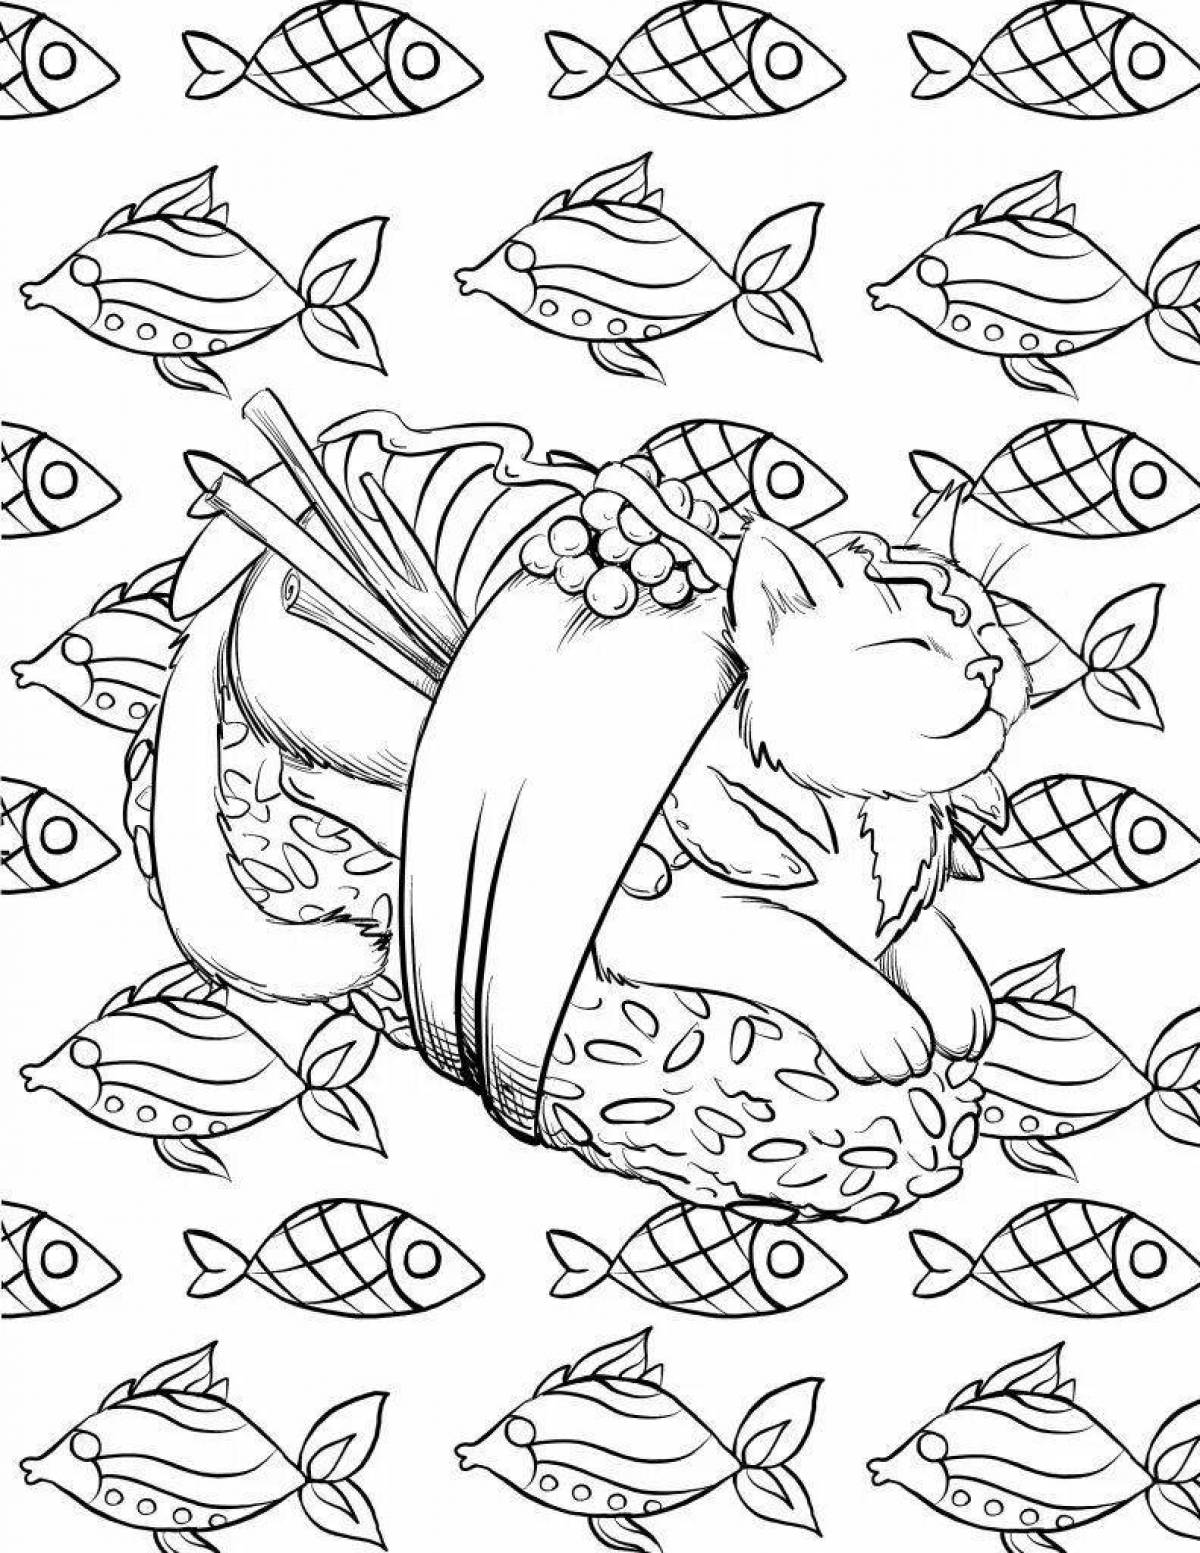 Coloring book outrageous sushi cat